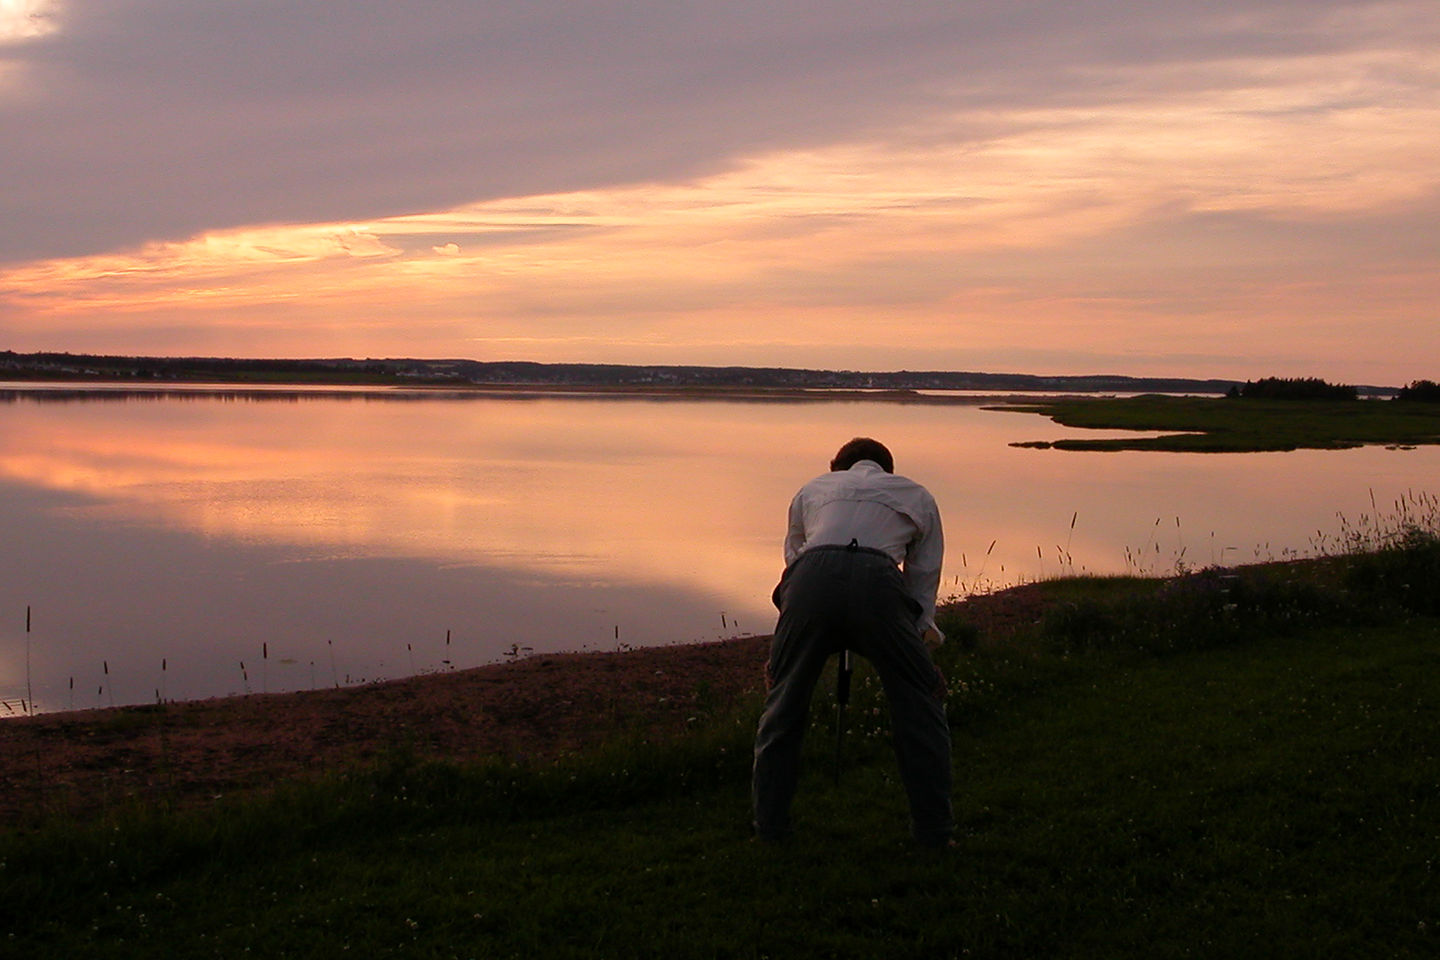 Herb photographing sunset from campsite